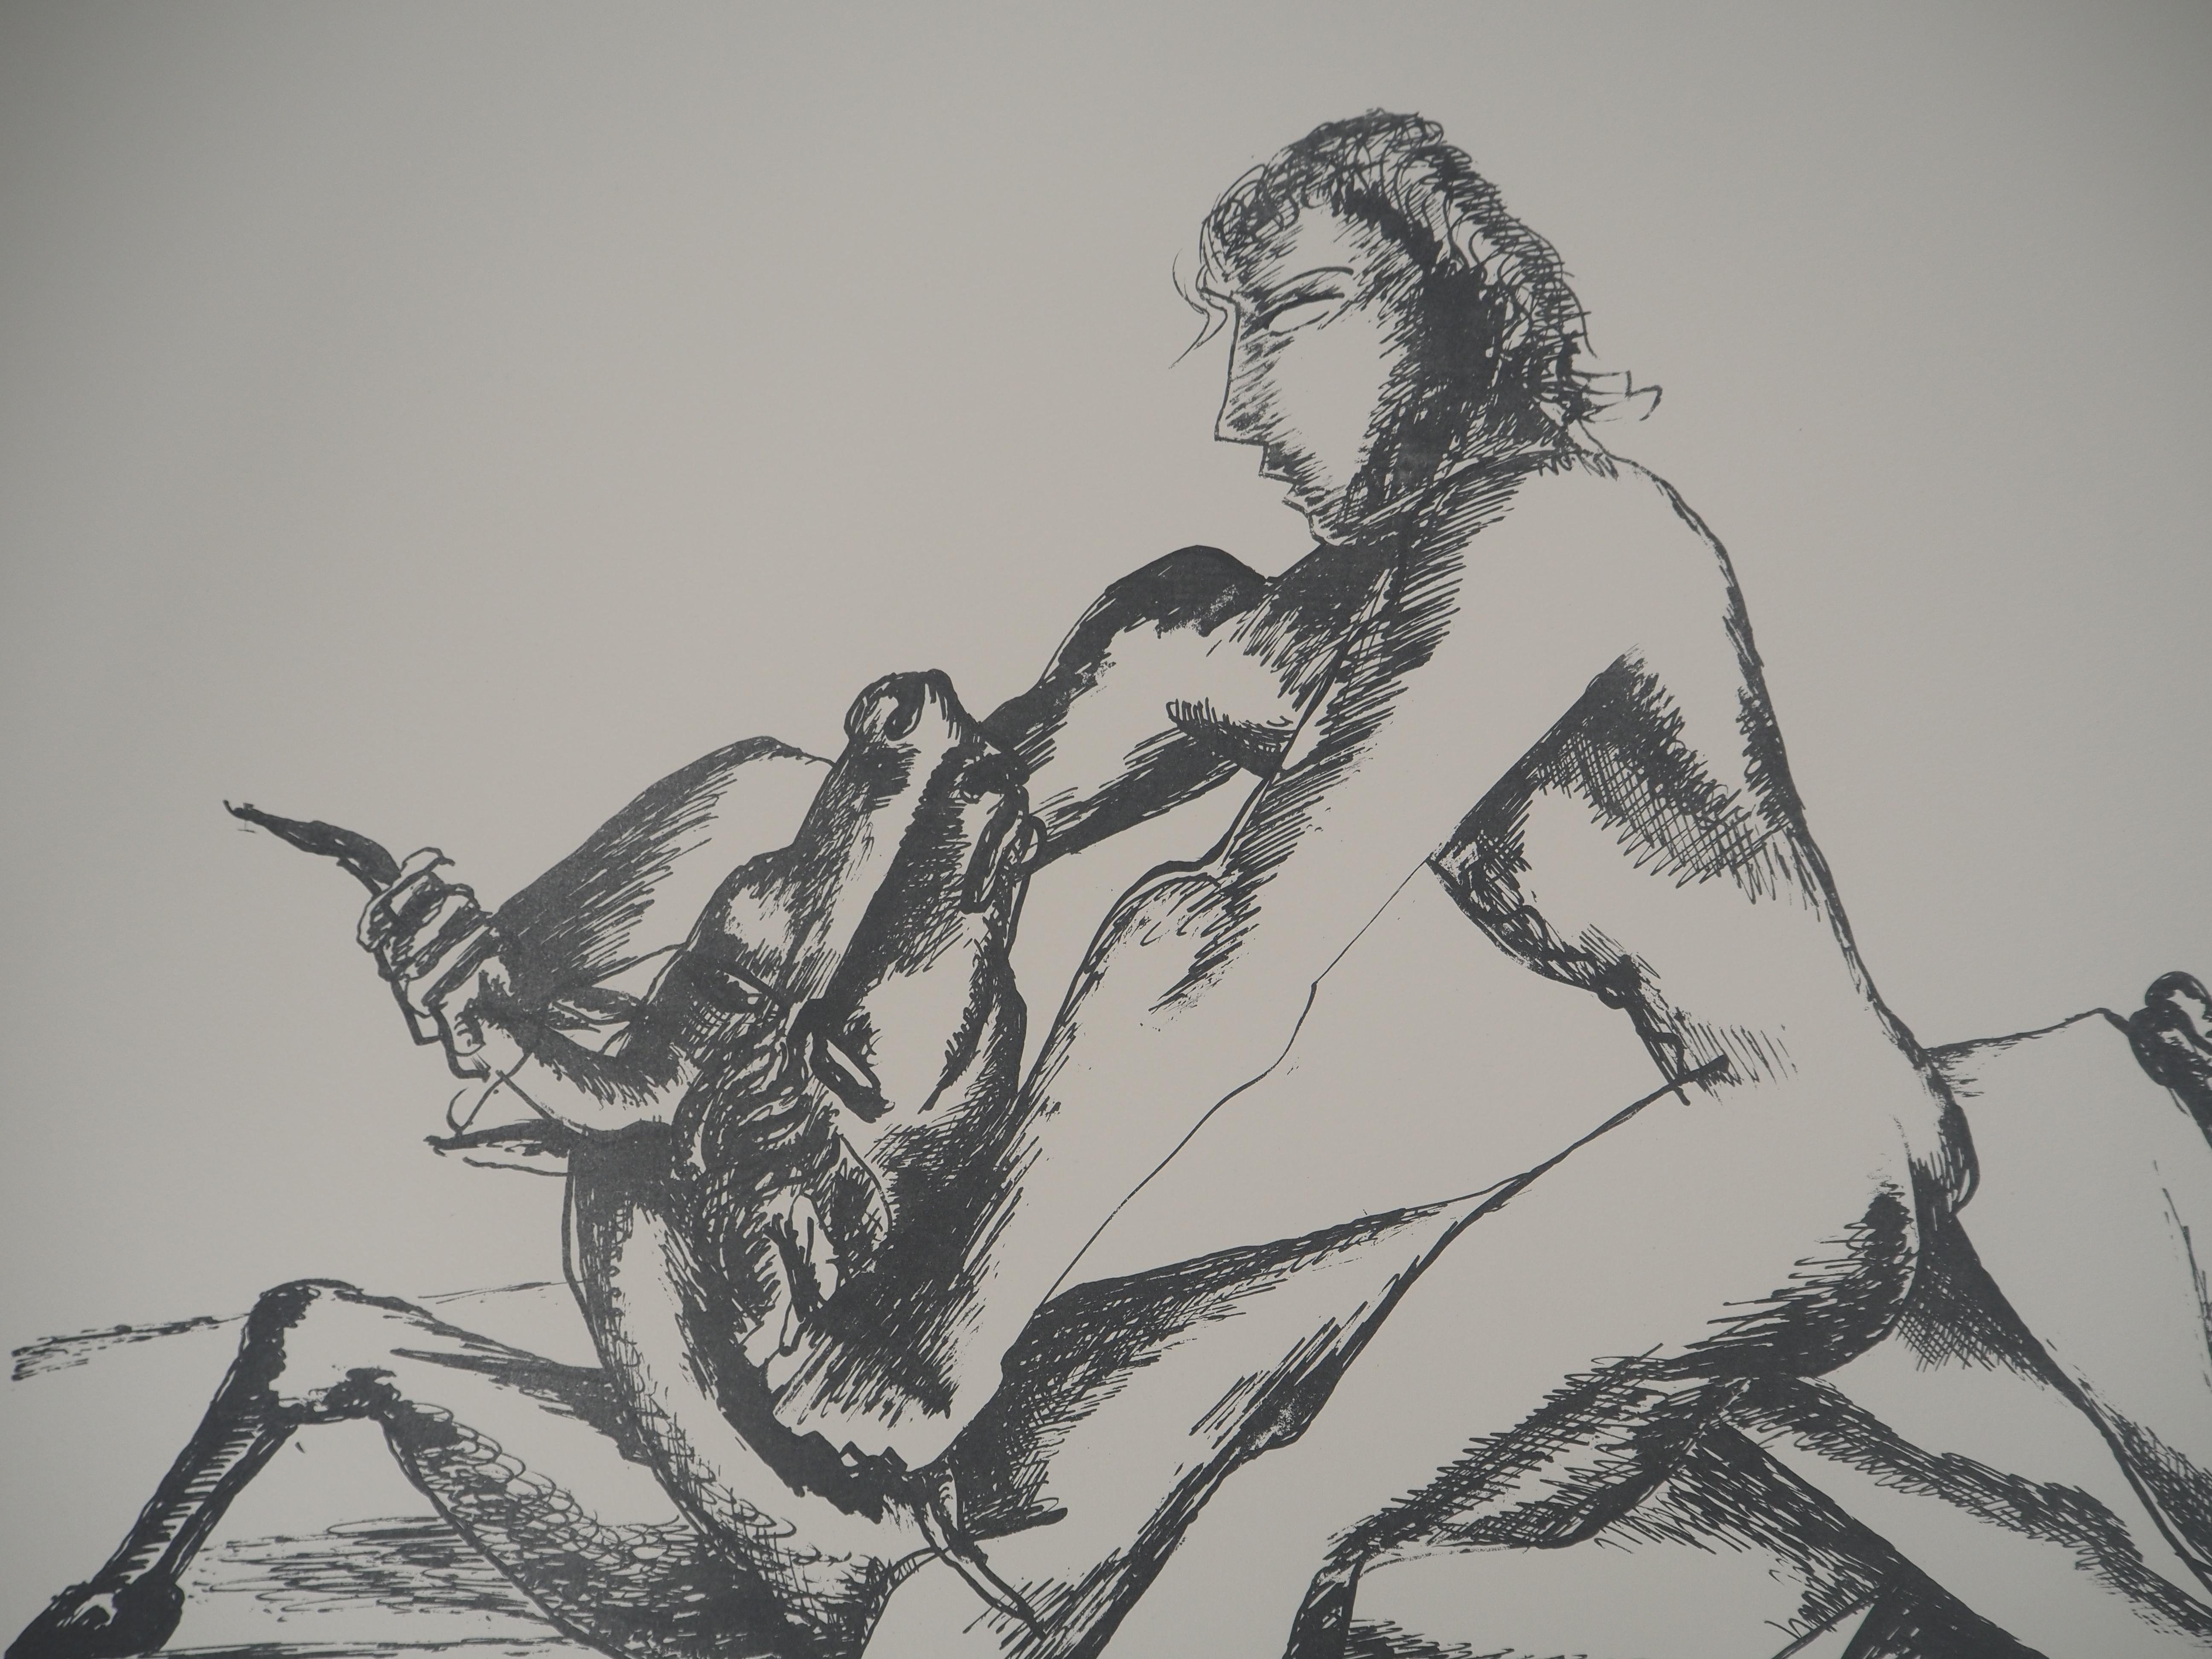 Ossip Zadkine
Mythology : Heracles and the Bull 1960

Original lithograph
Hand signed in pencil
Numbered /350 copies
On vellum size 69 x 54 cm (c. 27 x 21  in)

Excellent condition